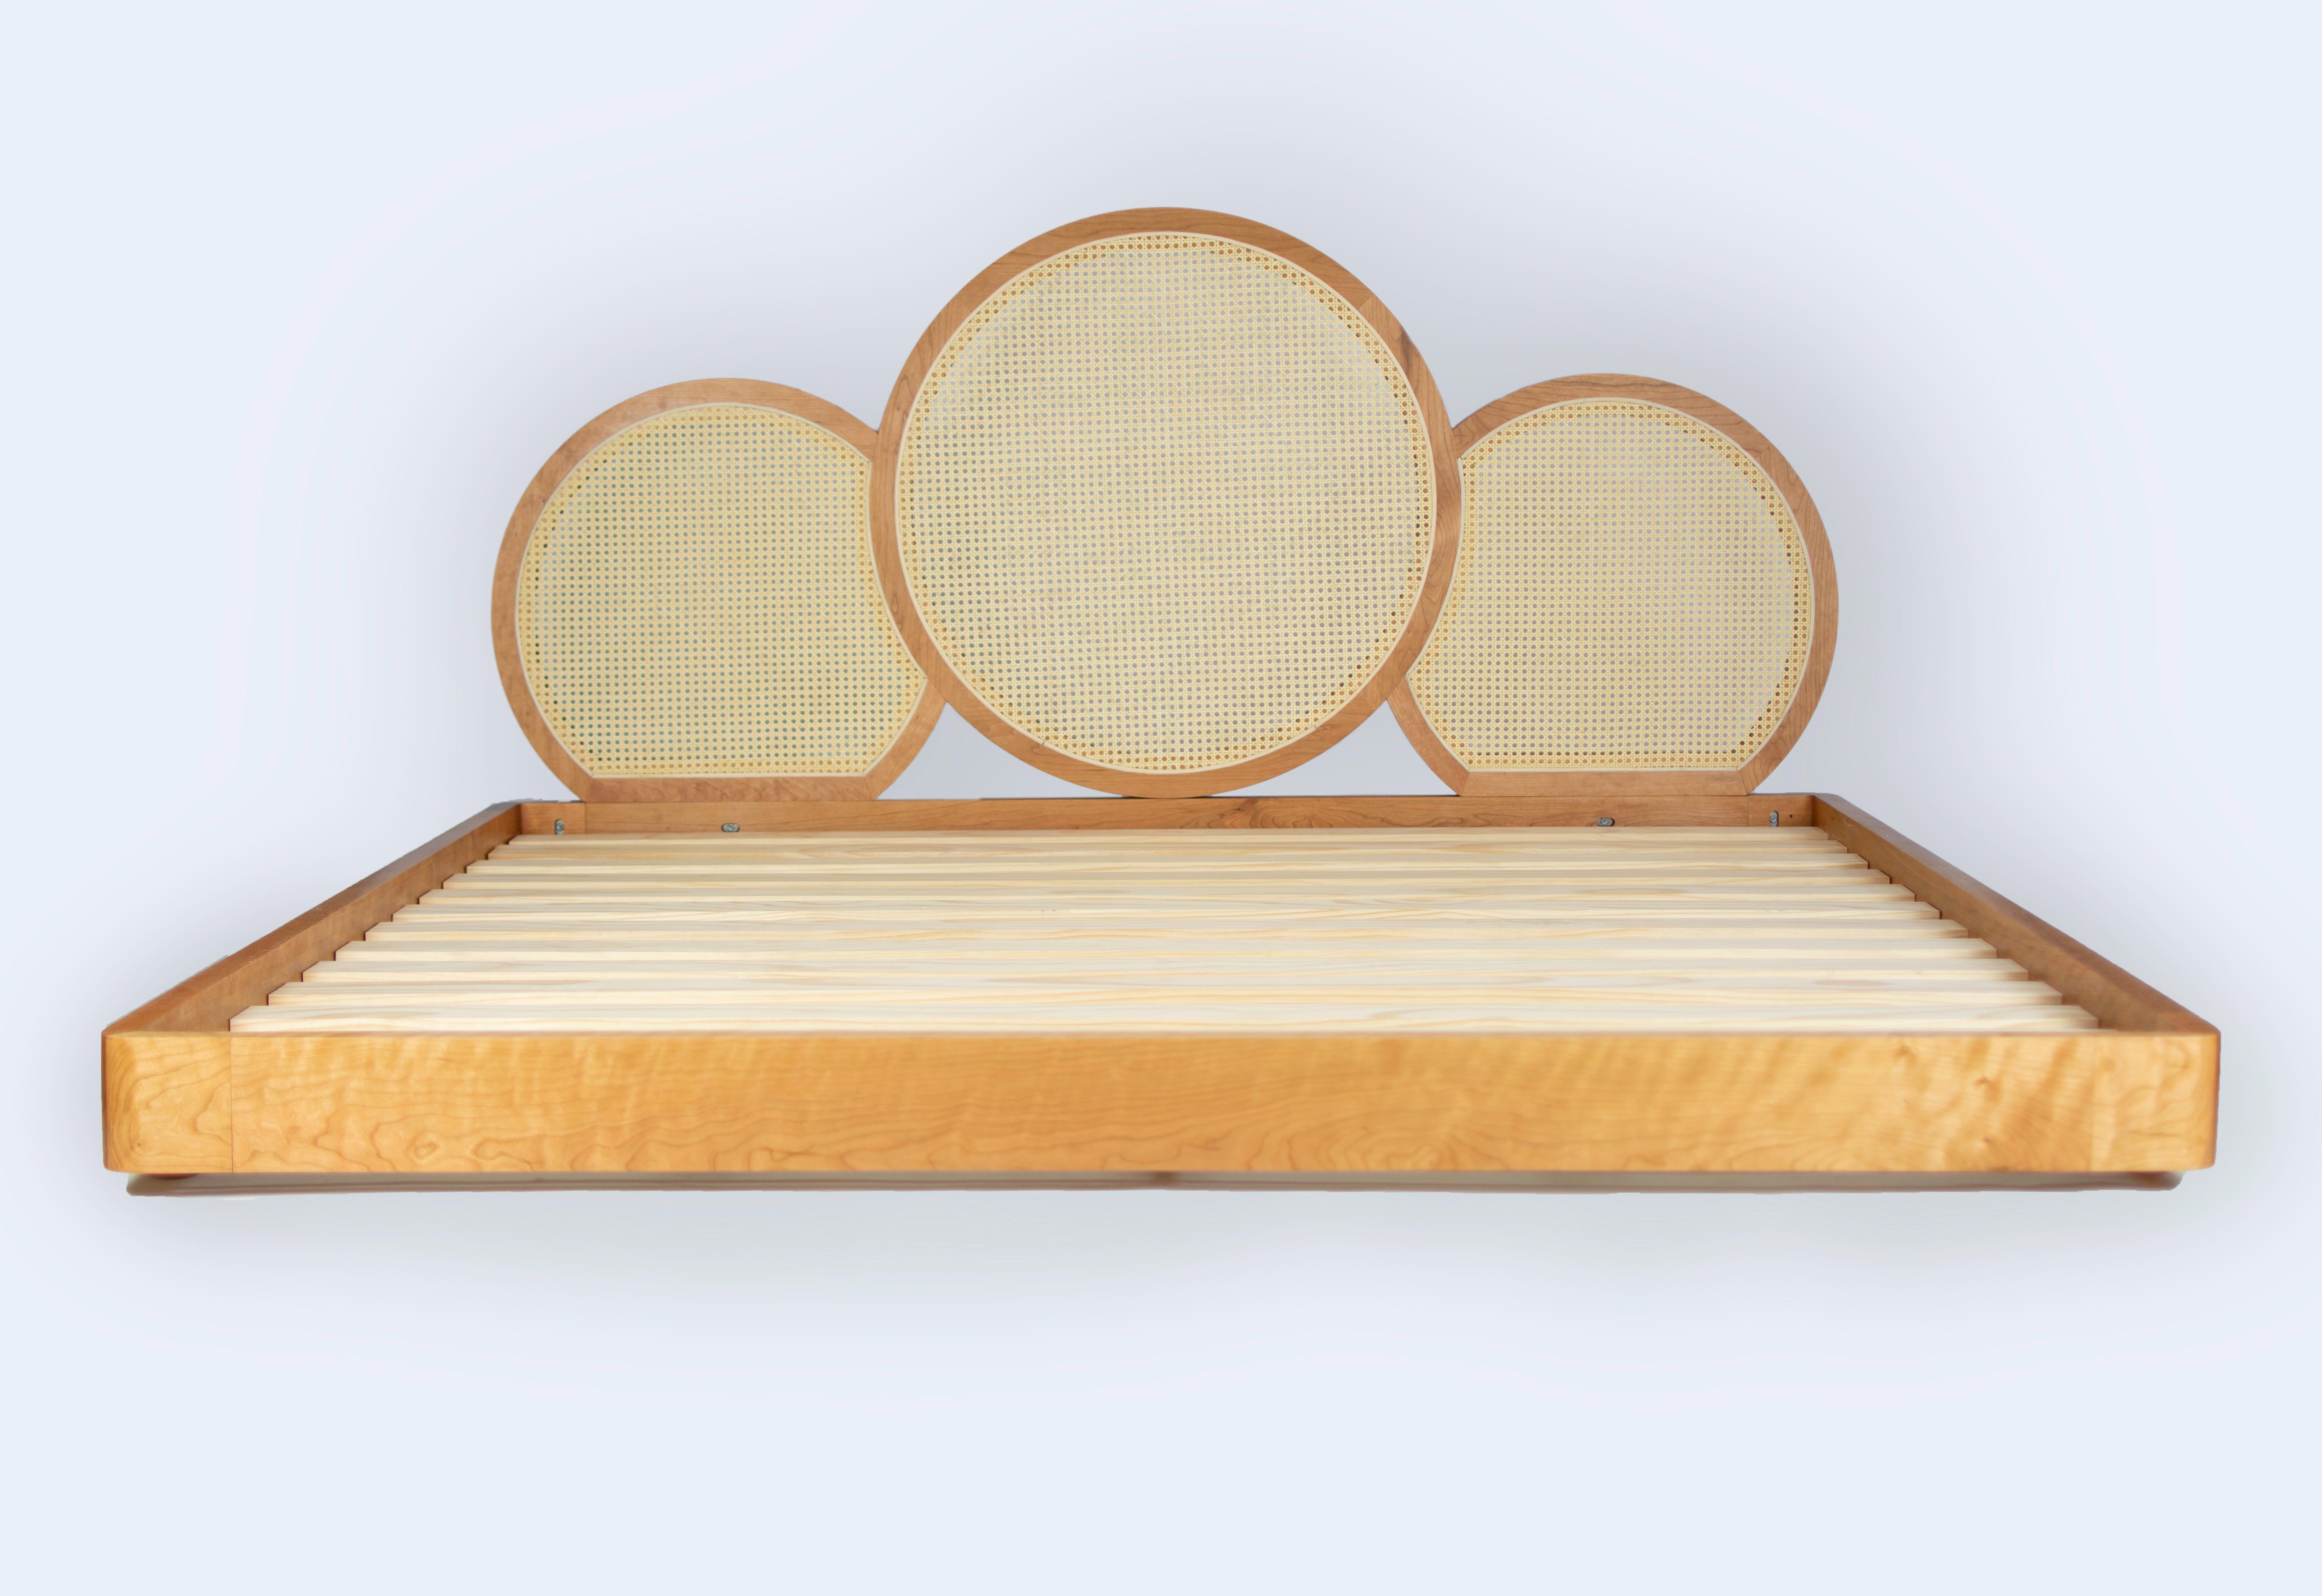 American Violette Bed by KLN Studio in Cherry and Natural Cane 'King Size Pictured' For Sale